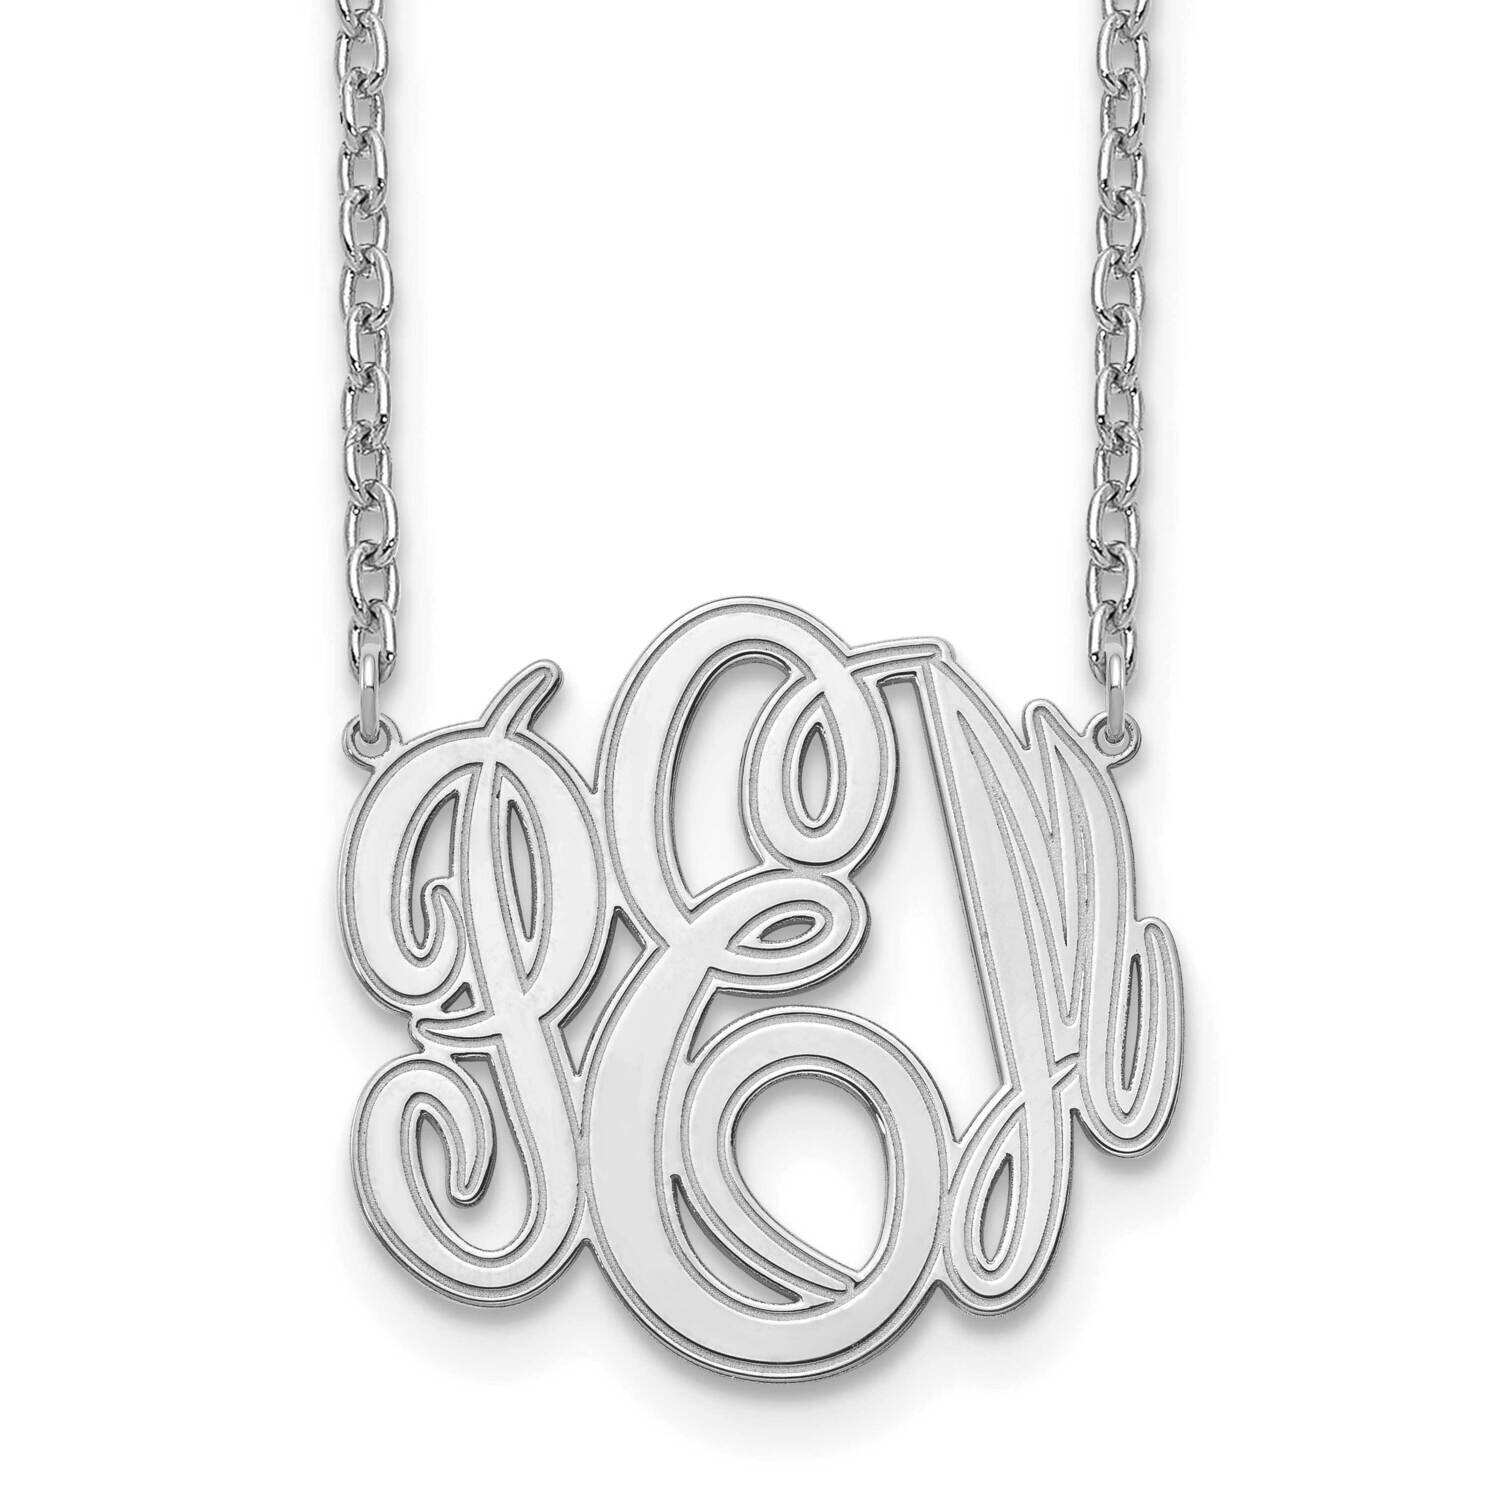 Etched Monogram Necklace 14k White Gold XNA889W